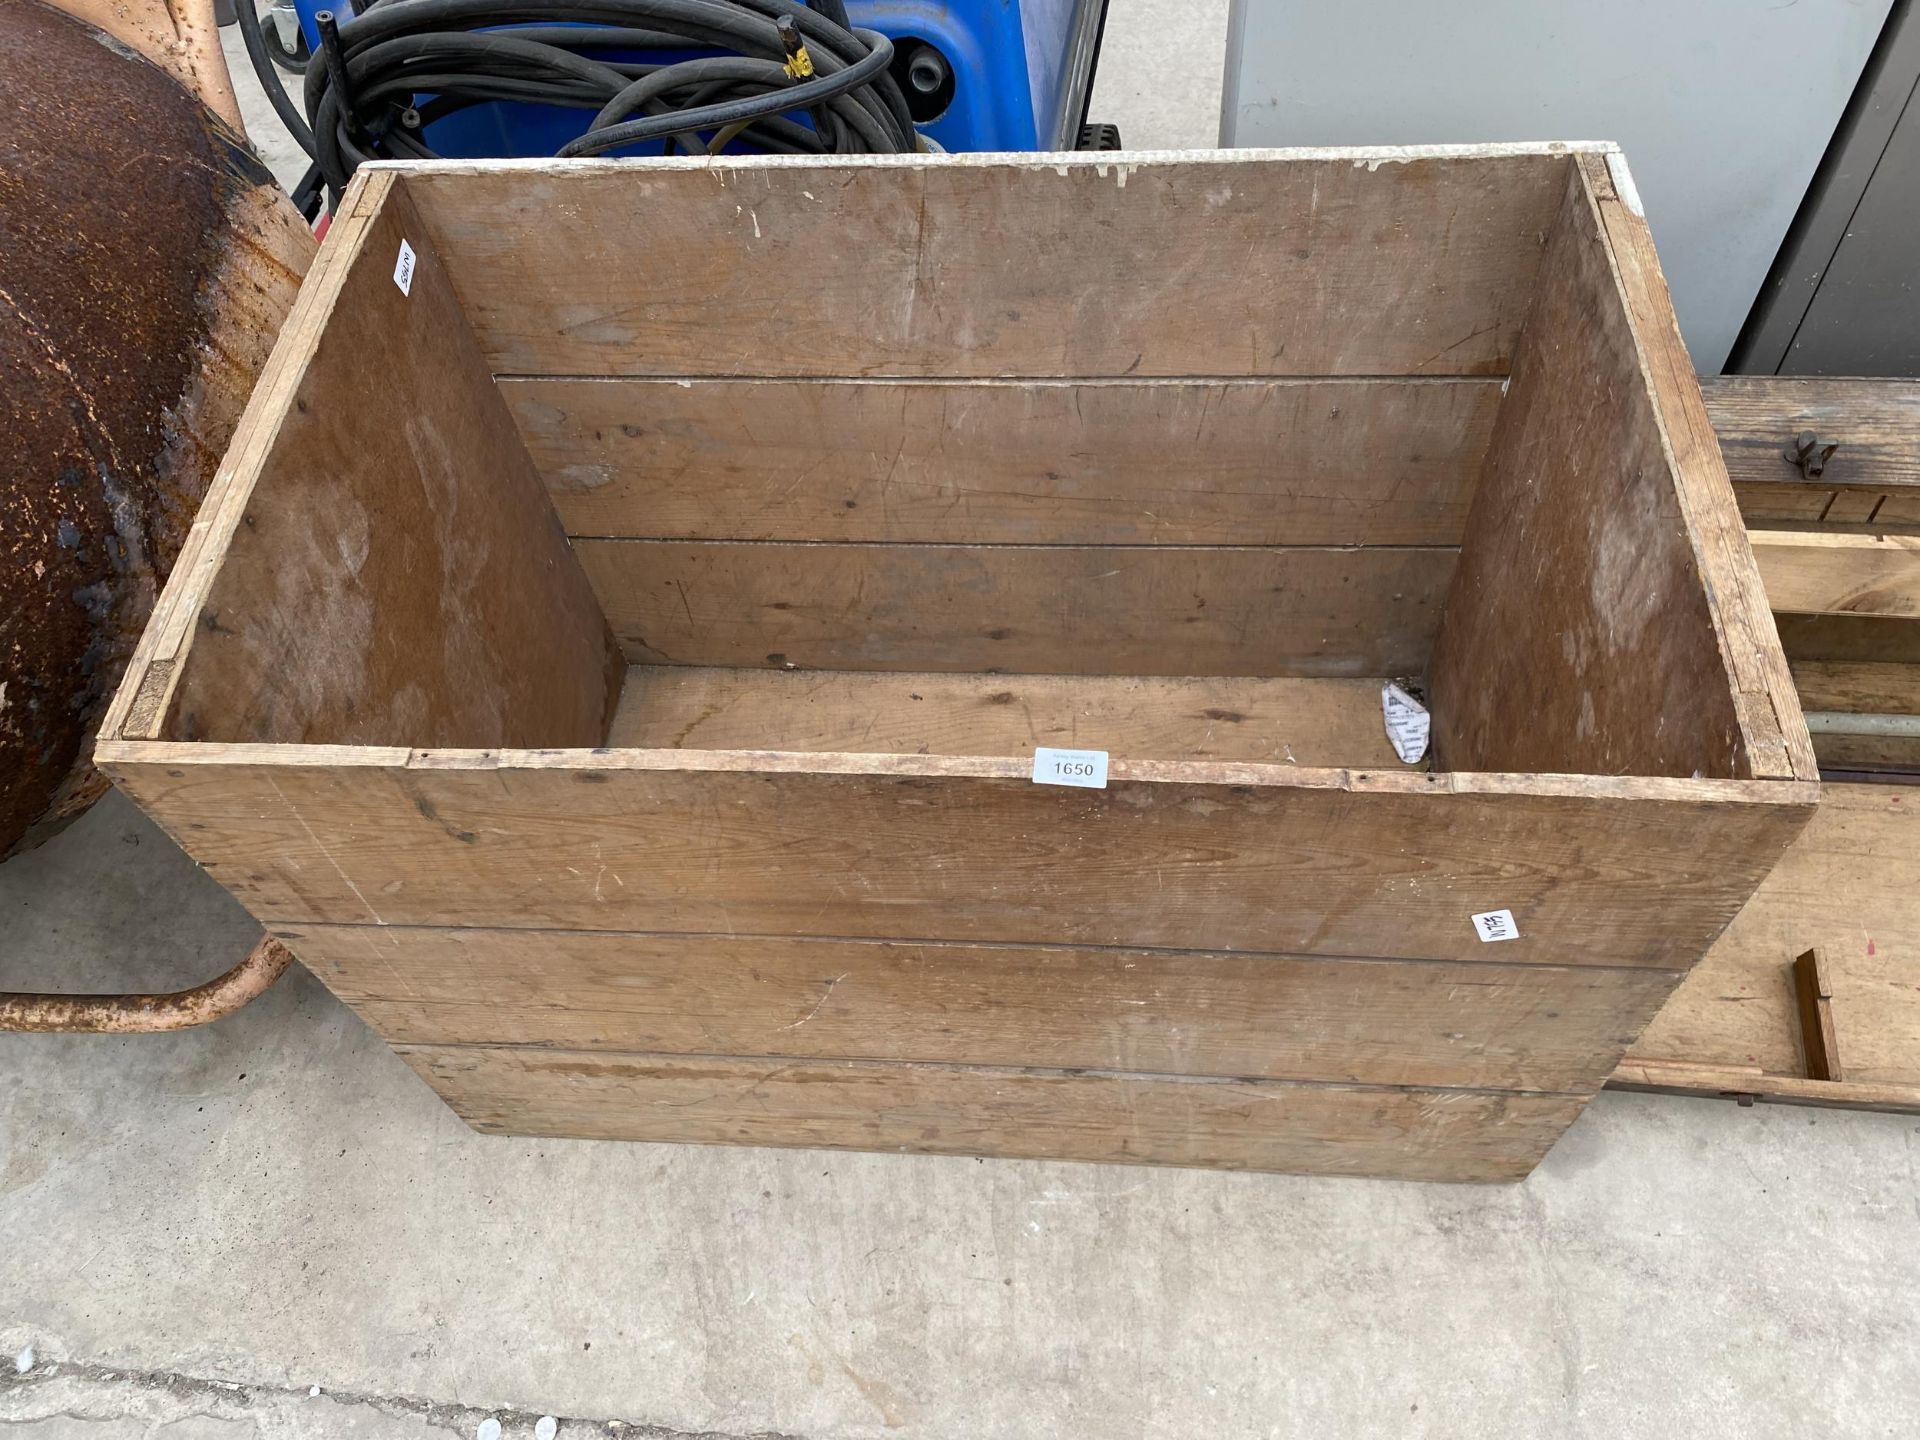 A LARGE WOODEN CRATE